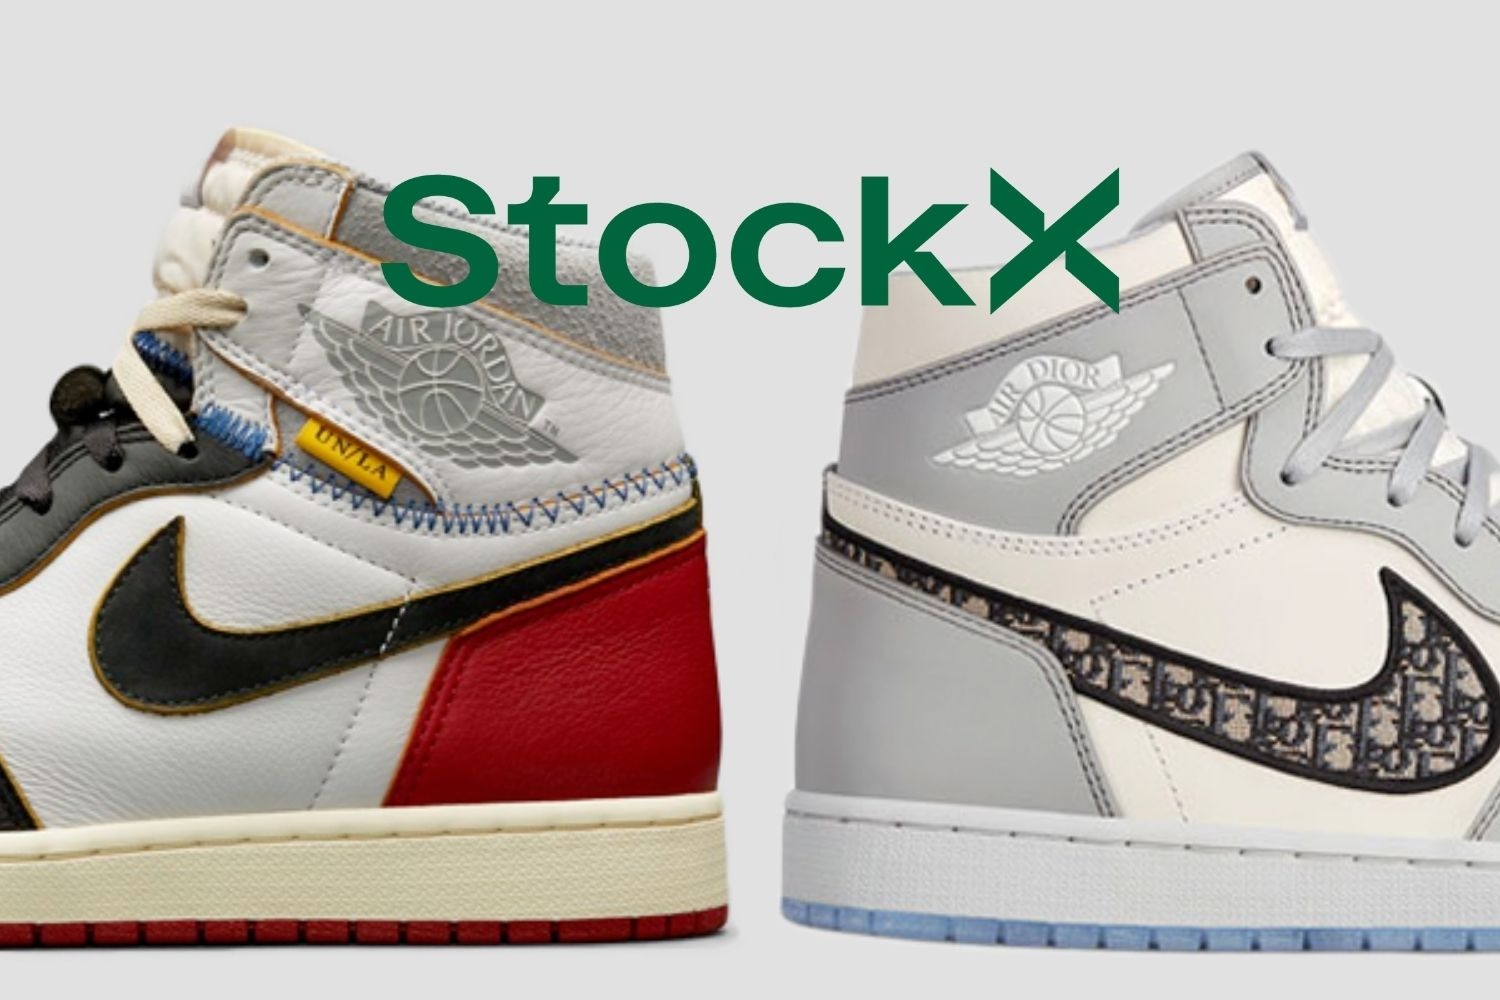 The best Jordan collaborations at StockX